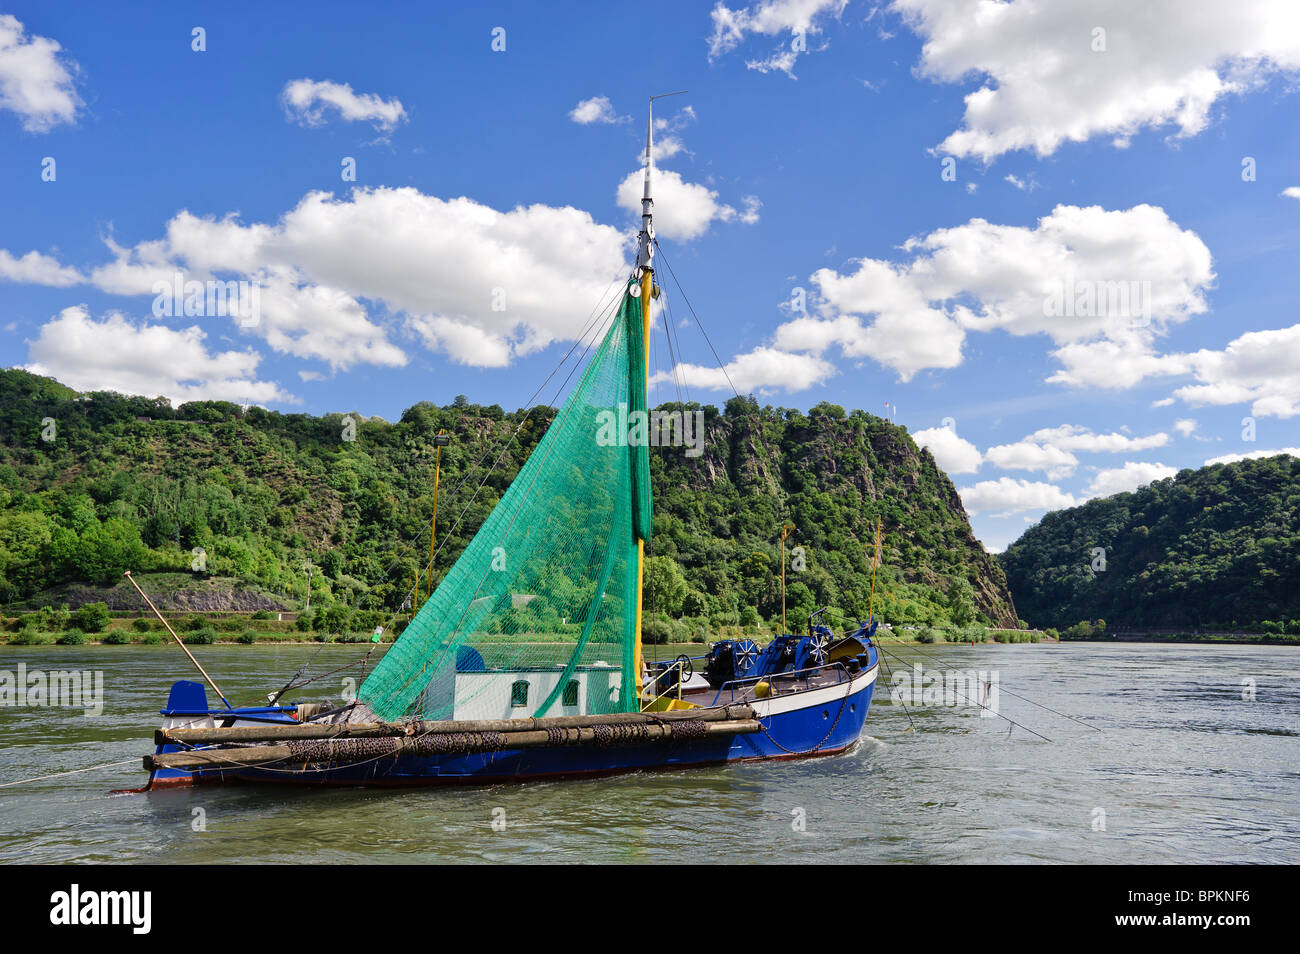 Old fishing boat on the Rhine River at the Lorelei Rock, UNESCO World Heritage Site, Sankt Goarshausen,  Germany Stock Photo